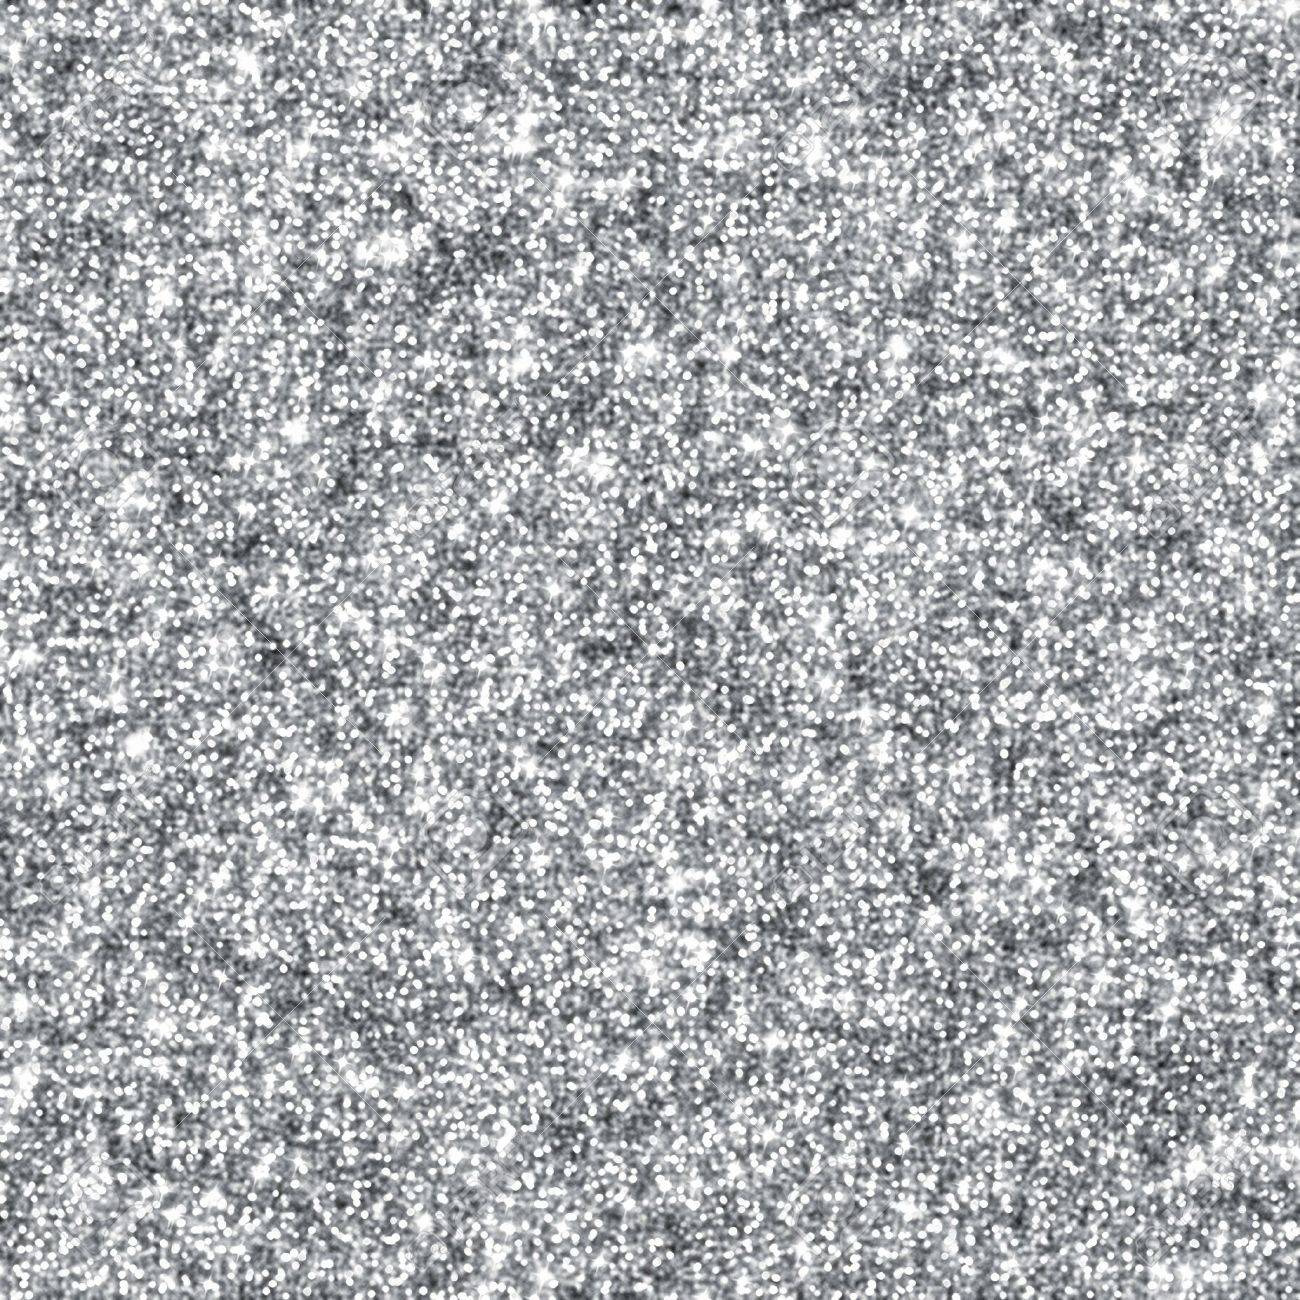 Silver Glitter Texture Or Background Stock Photo Picture And